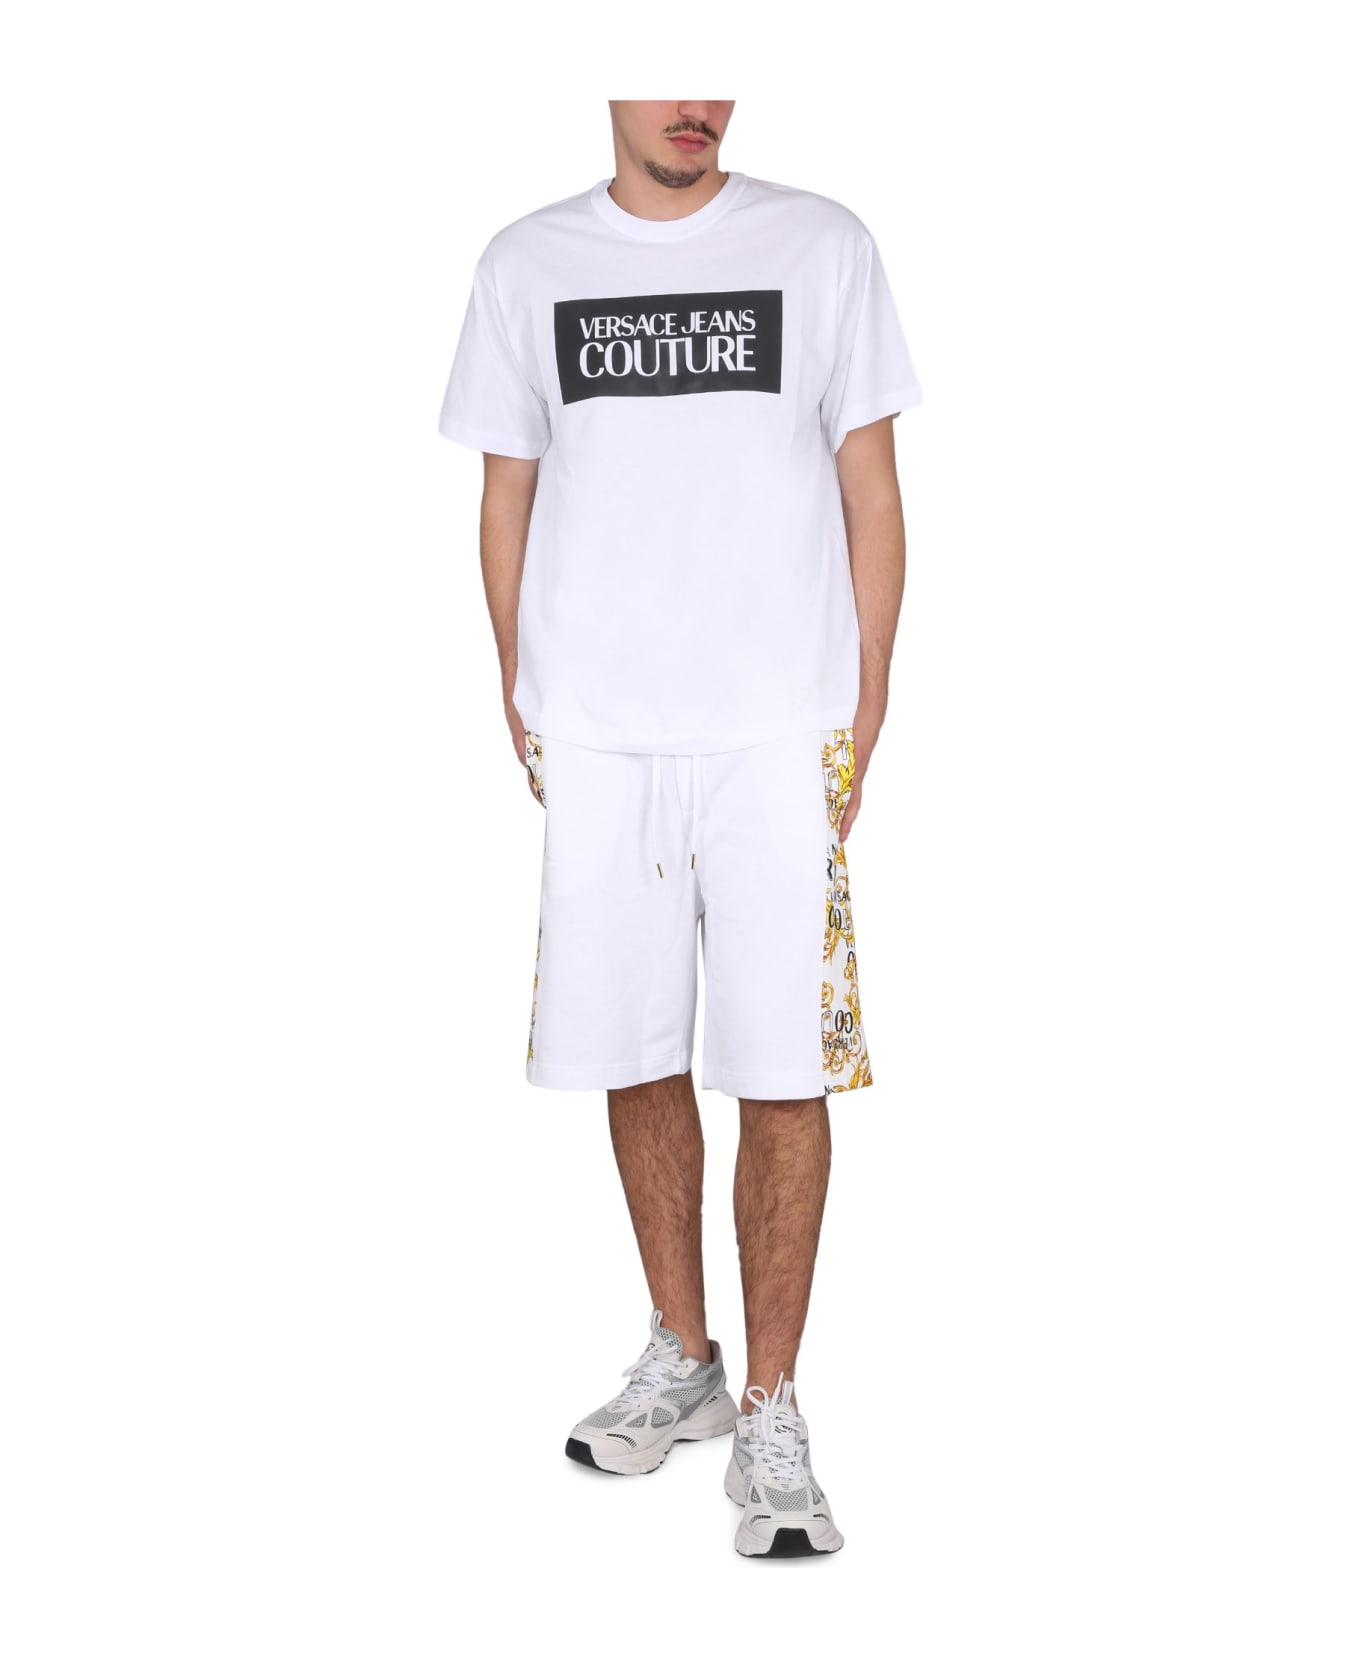 Versace Jeans Couture T-shirt - BIANCO